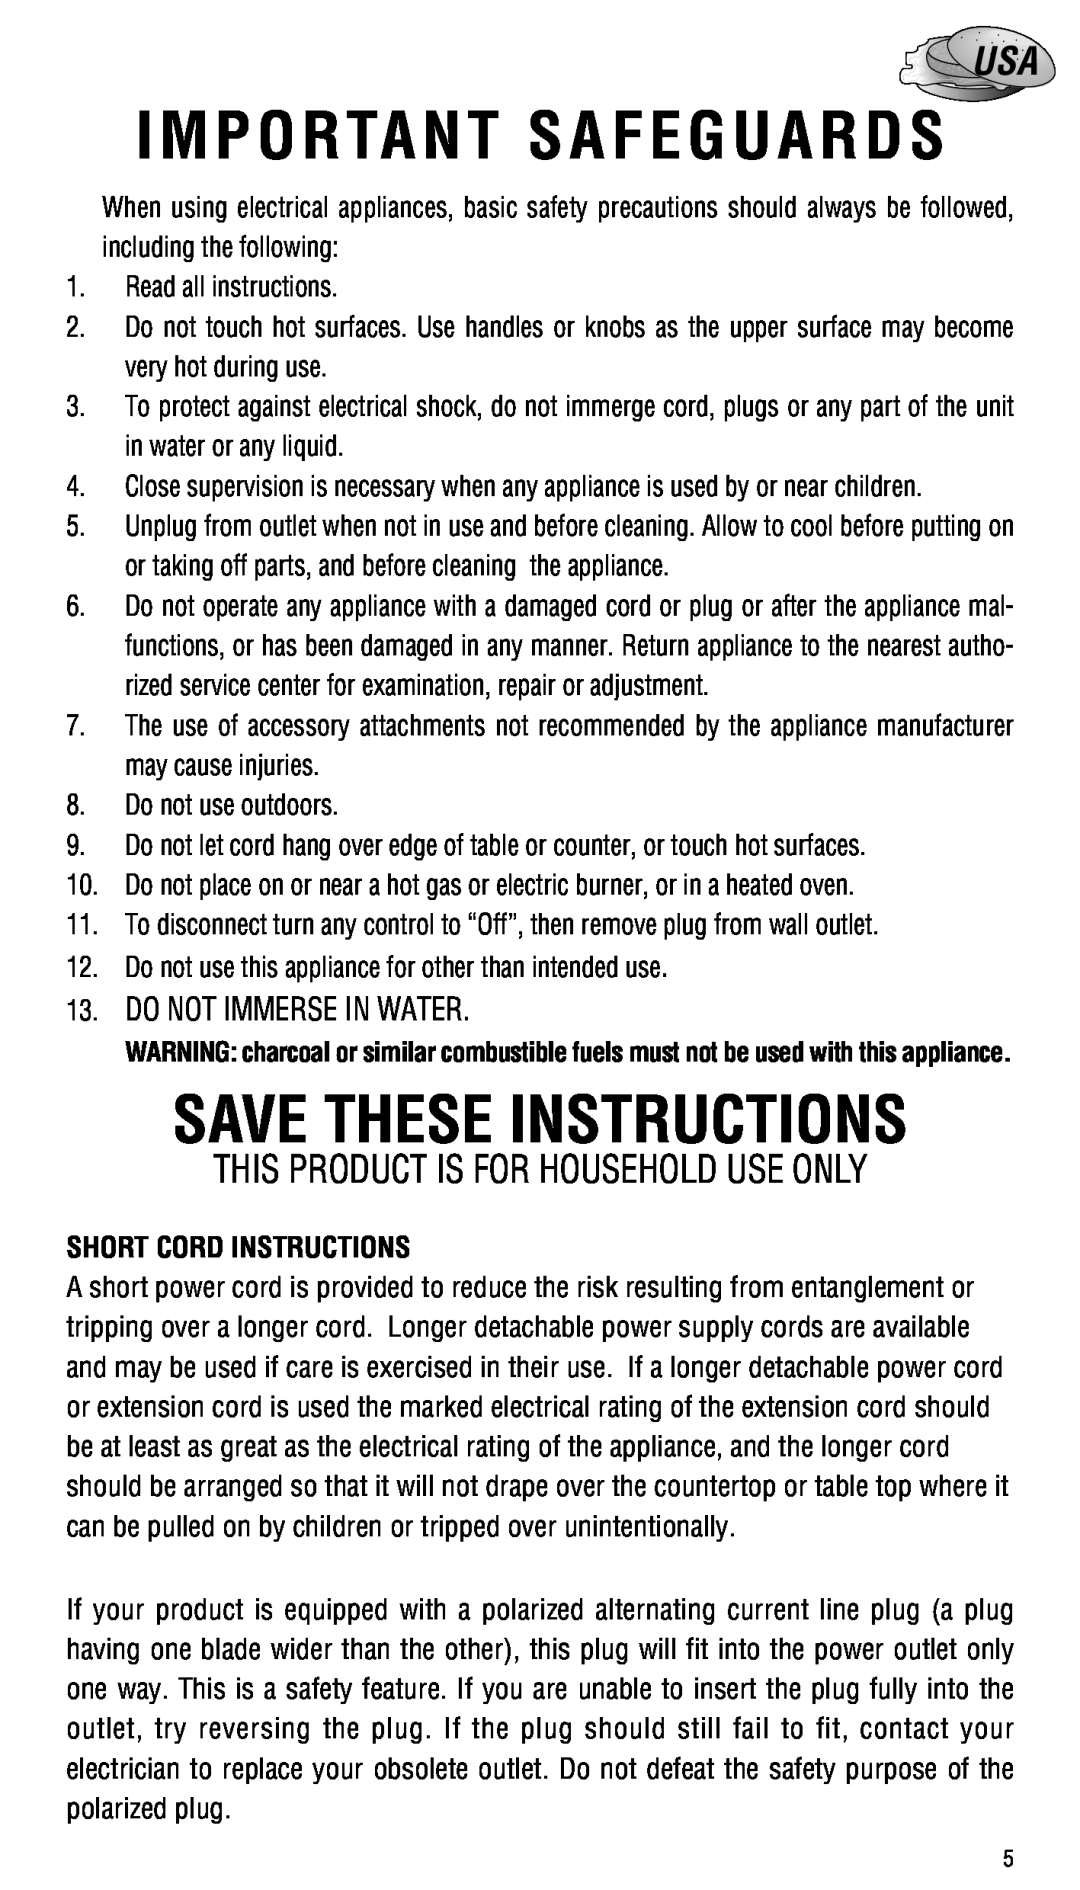 DeLonghi CGH800 manual Short Cord Instructions, Important Safeguards, Save These Instructions, Do Not Immerse In Water 